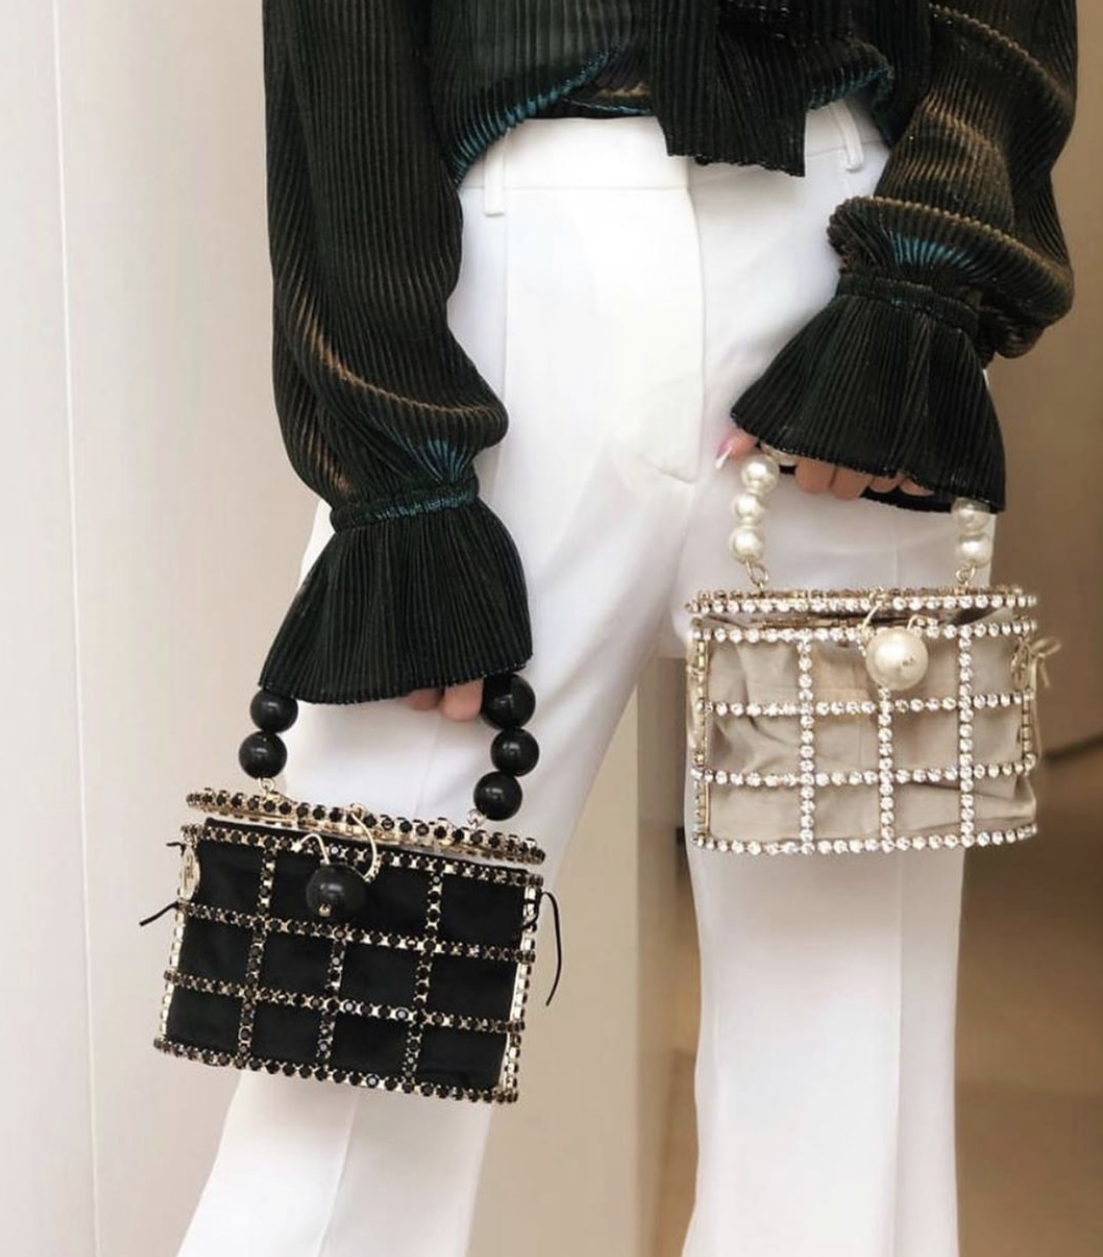 Bomb_Product_of_the_Day_Rosantica_Jeweled_Clutch_Bags_9